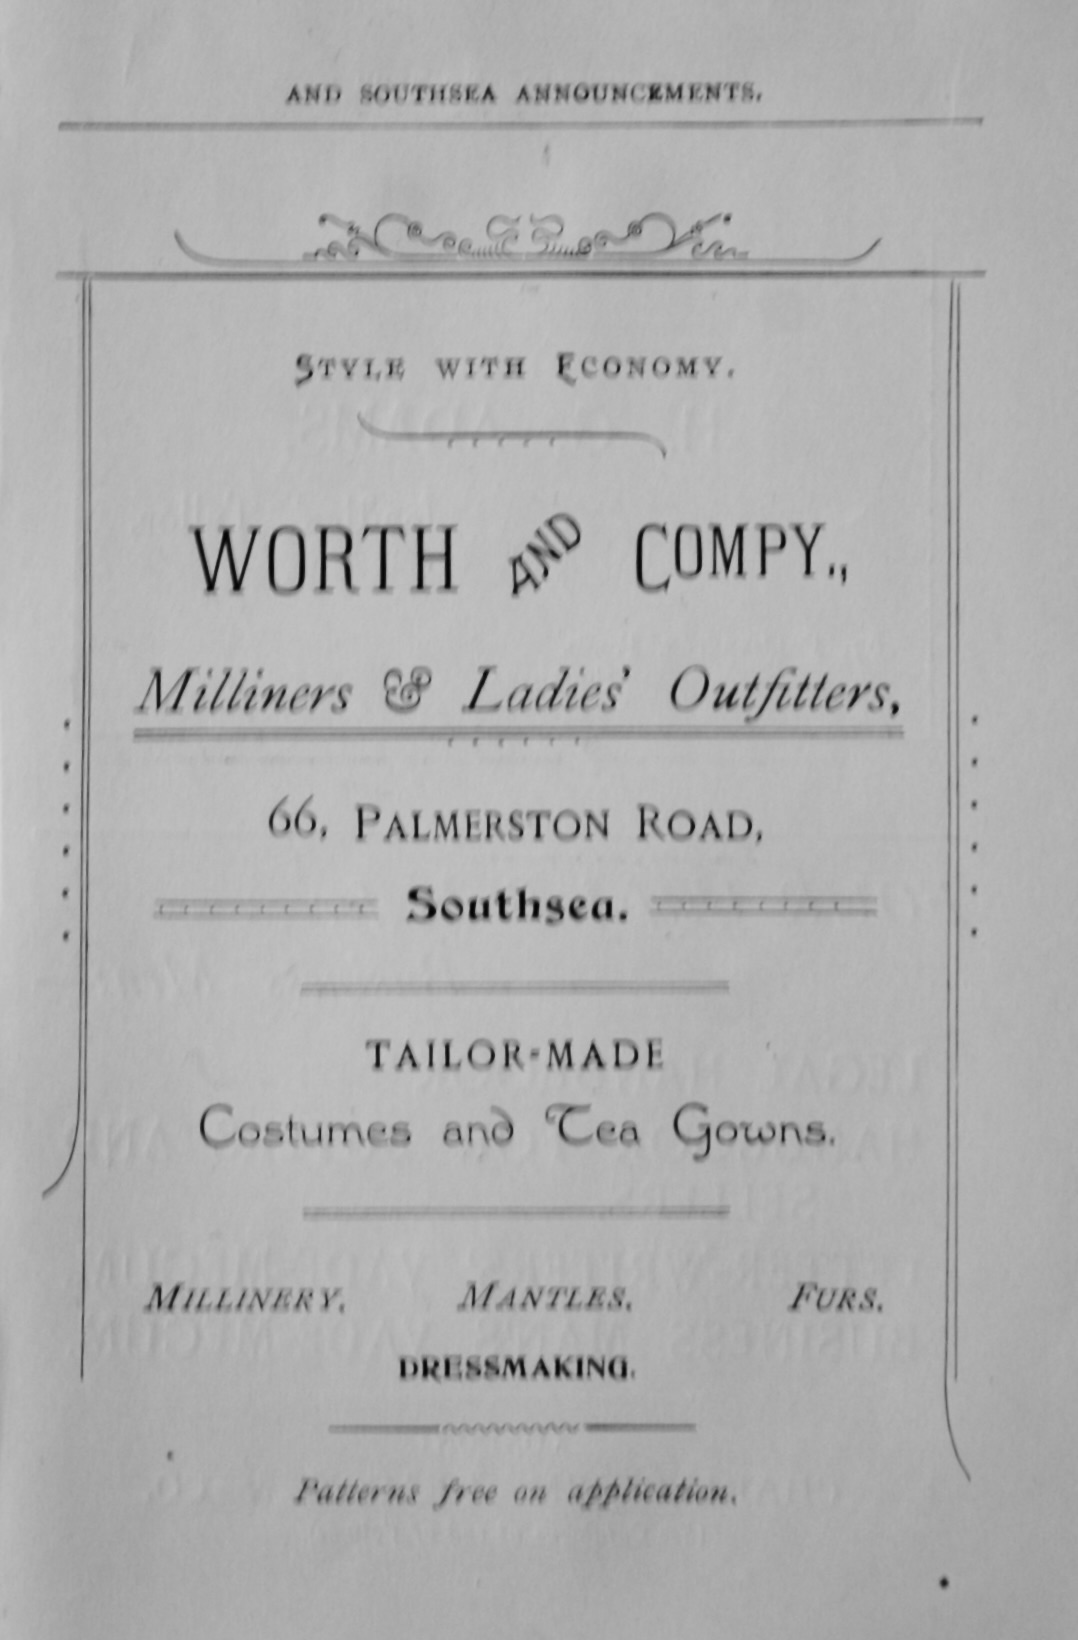 Worth and Compy., Milliners & Ladies' Outfitters, 66, Palmerston Road, Sout